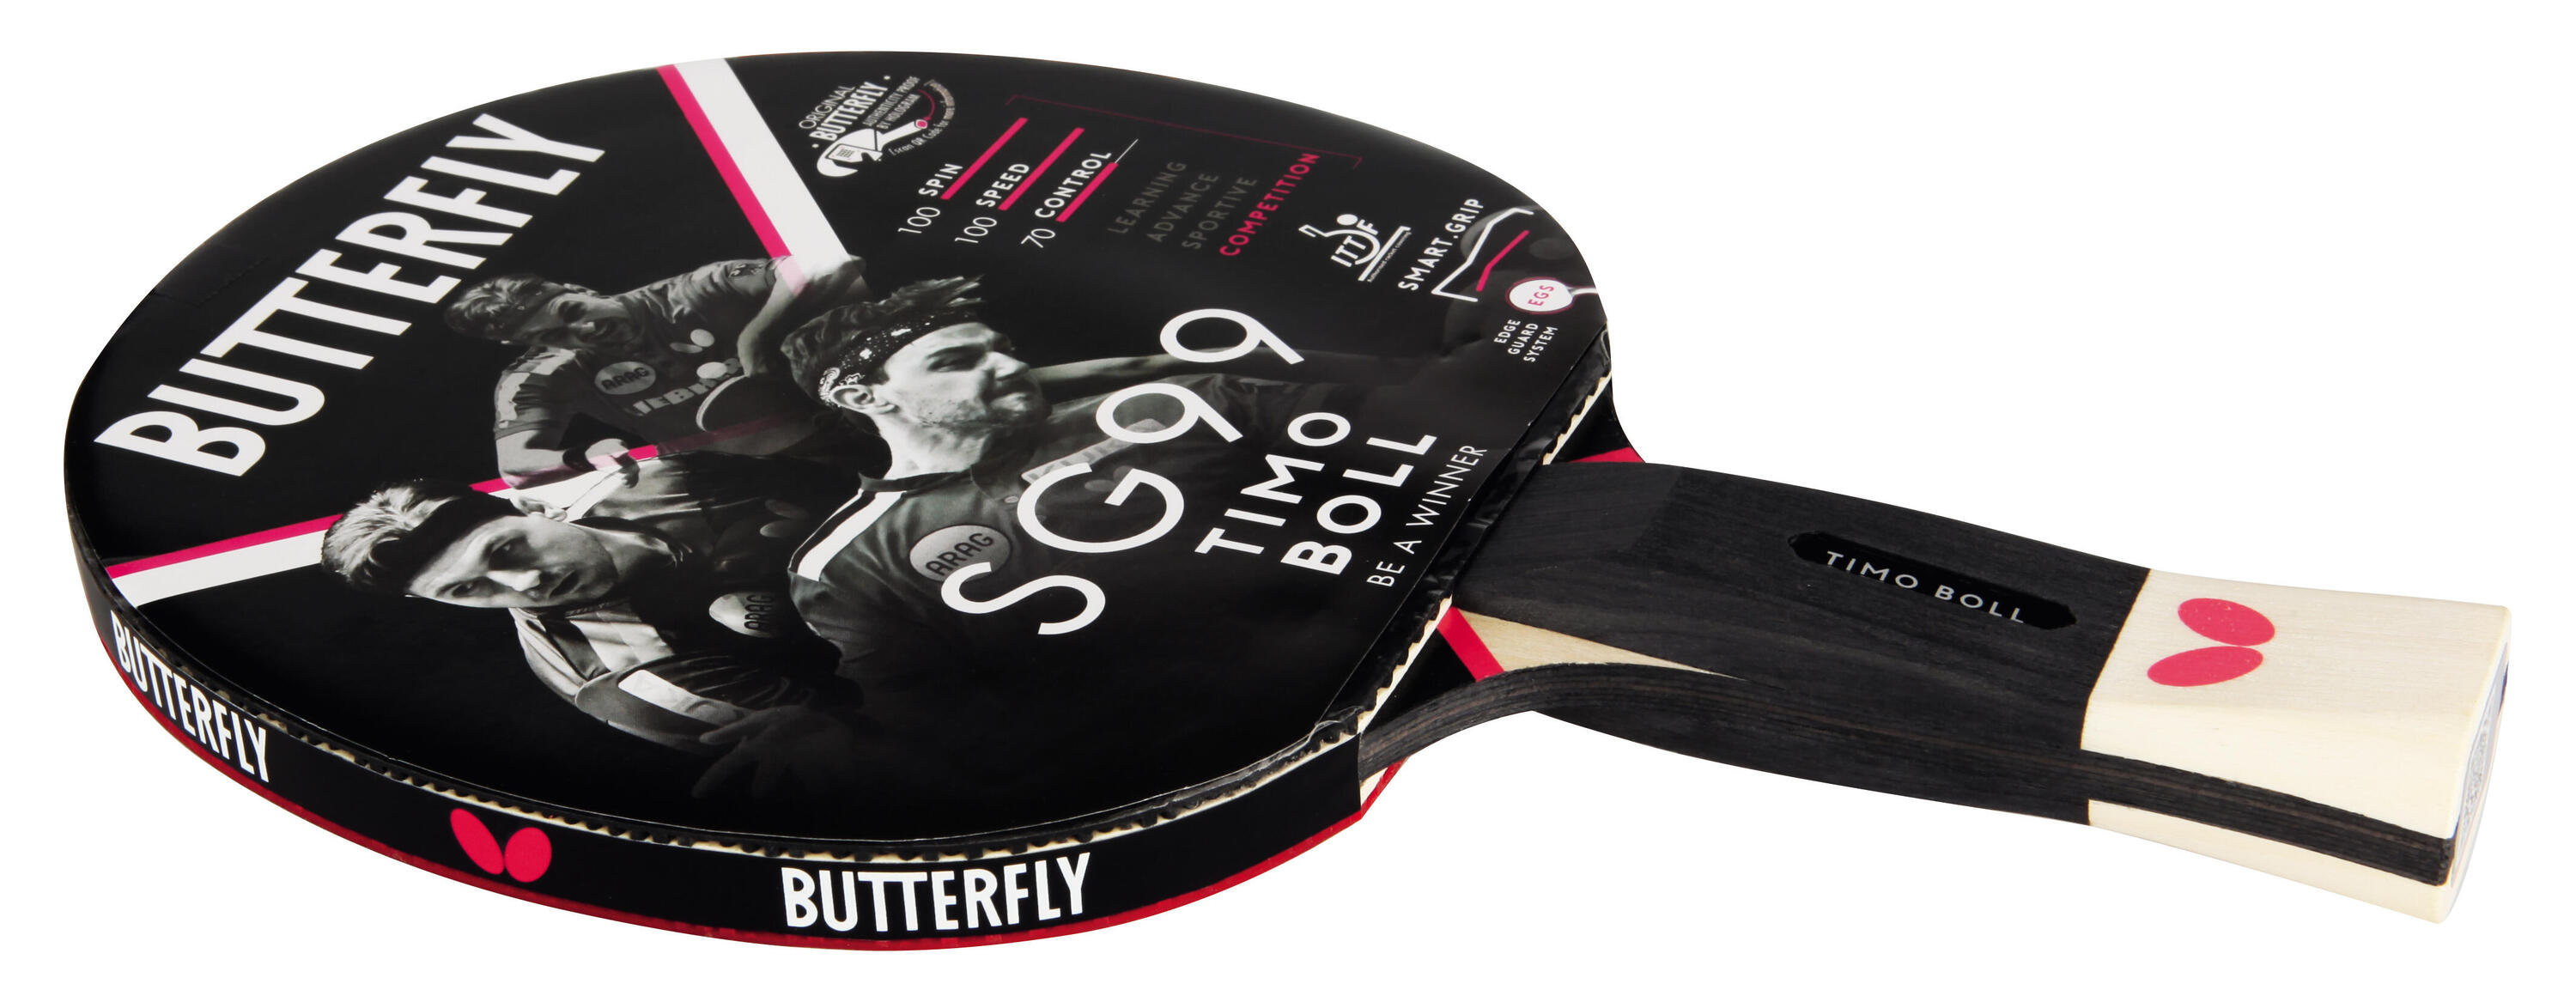 Butterfly Timo Boll SG99 2/7